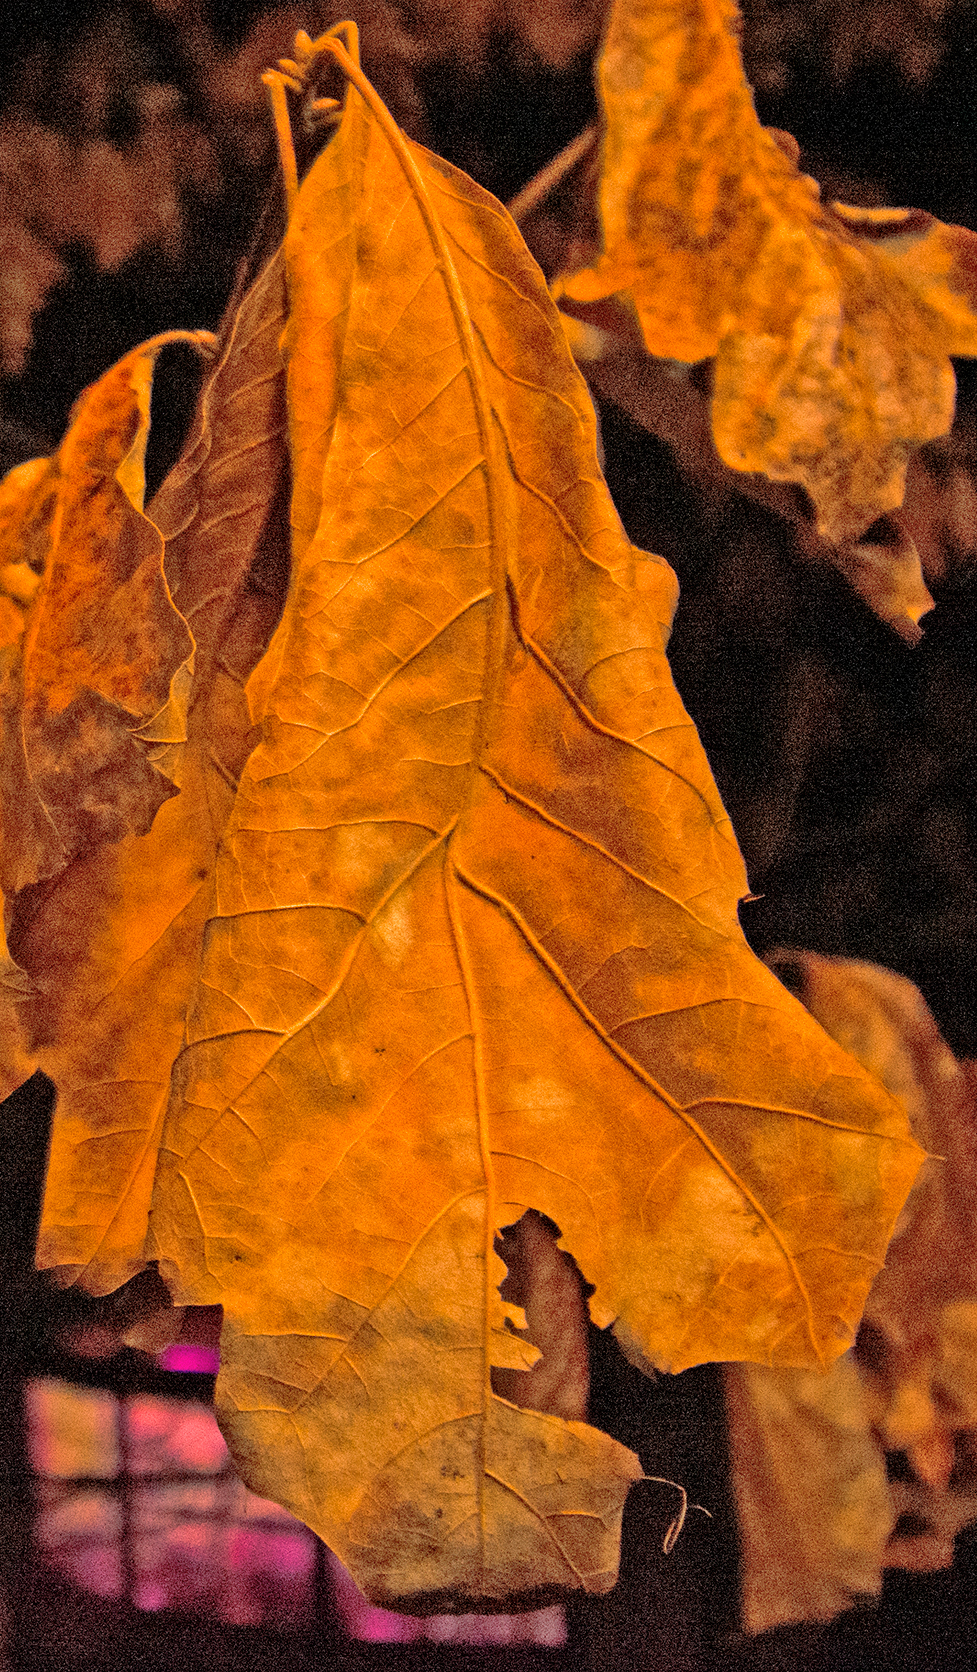 red oak leaf from the old tree named Ruth at 3 Dog Acres on 15 March 2022